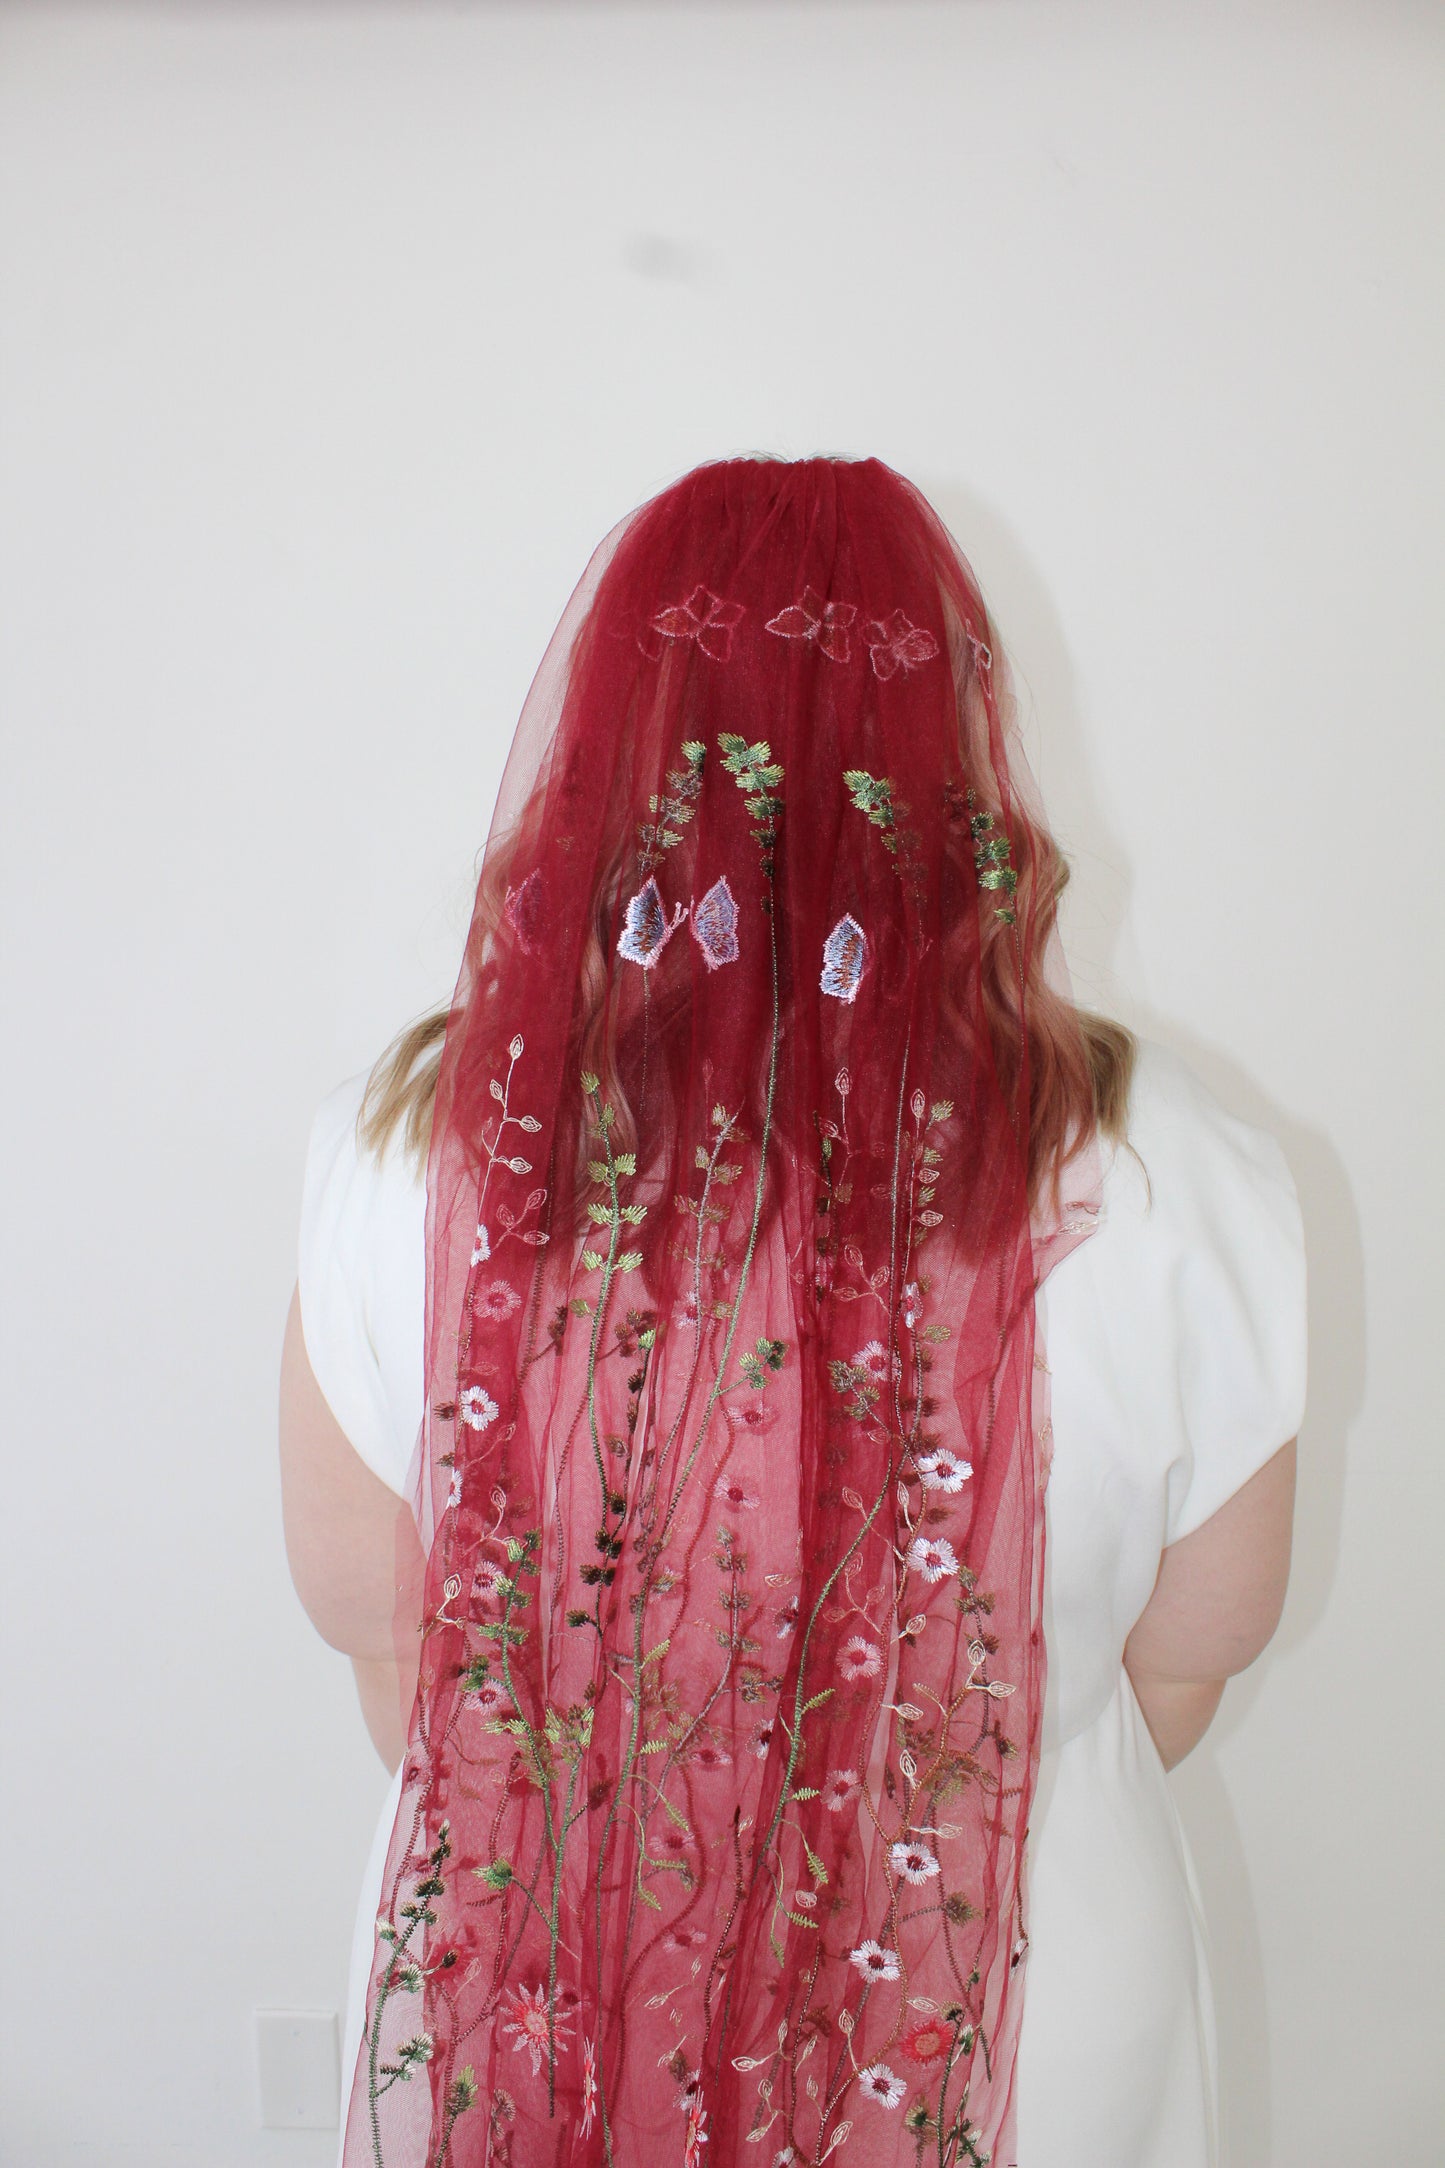 Red Wildflower Veil (limited edition)